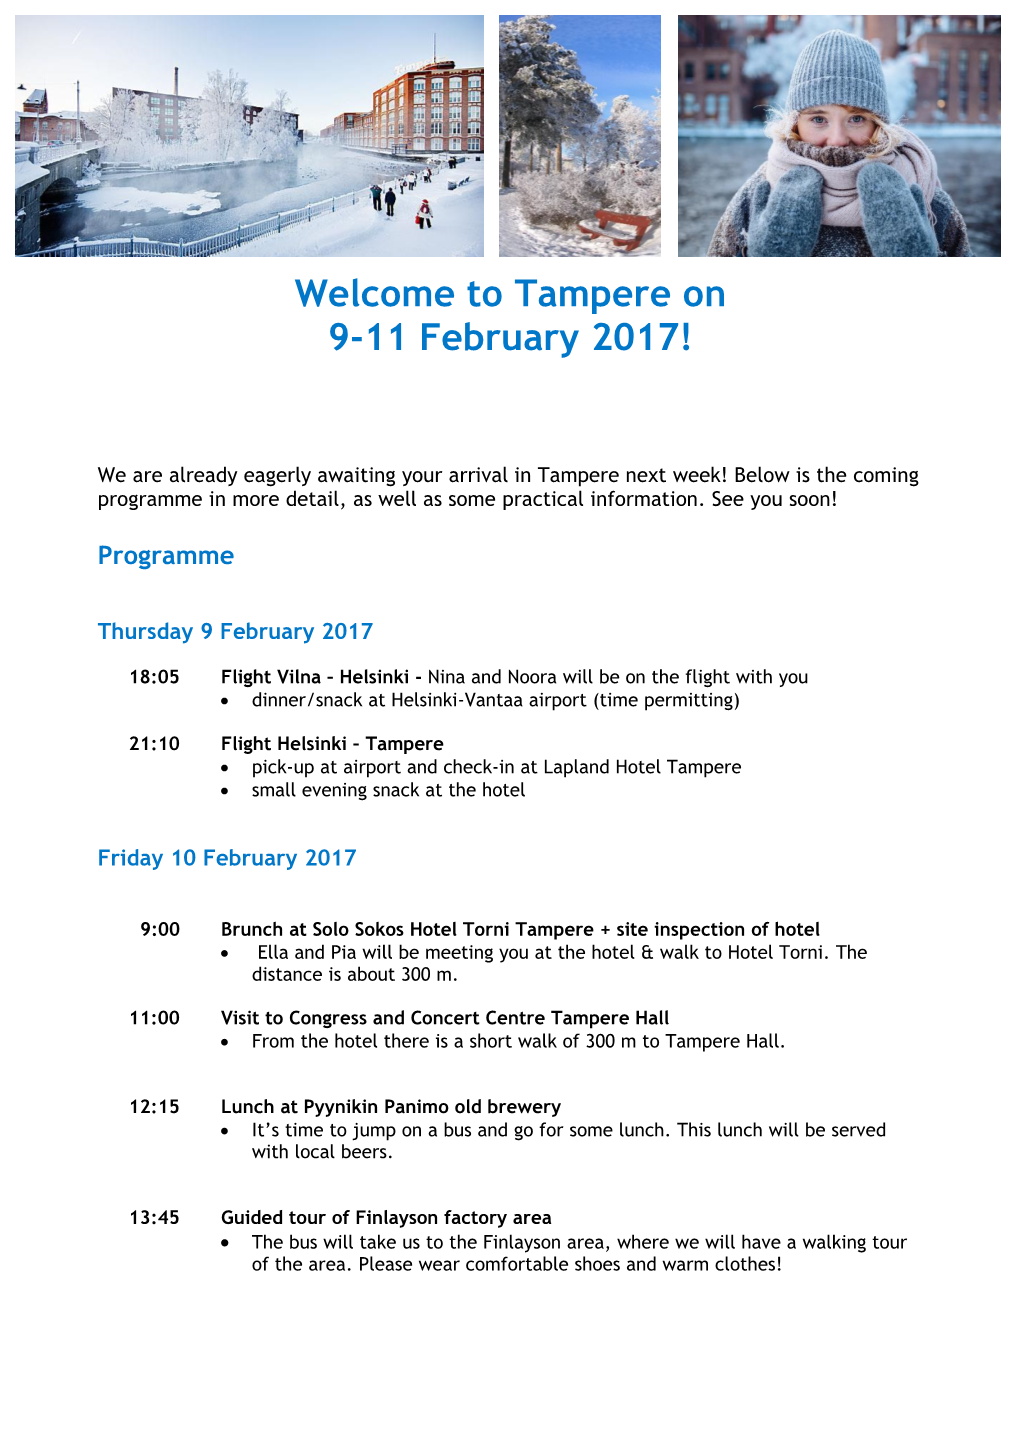 Tampere on 9-11 February 2017!